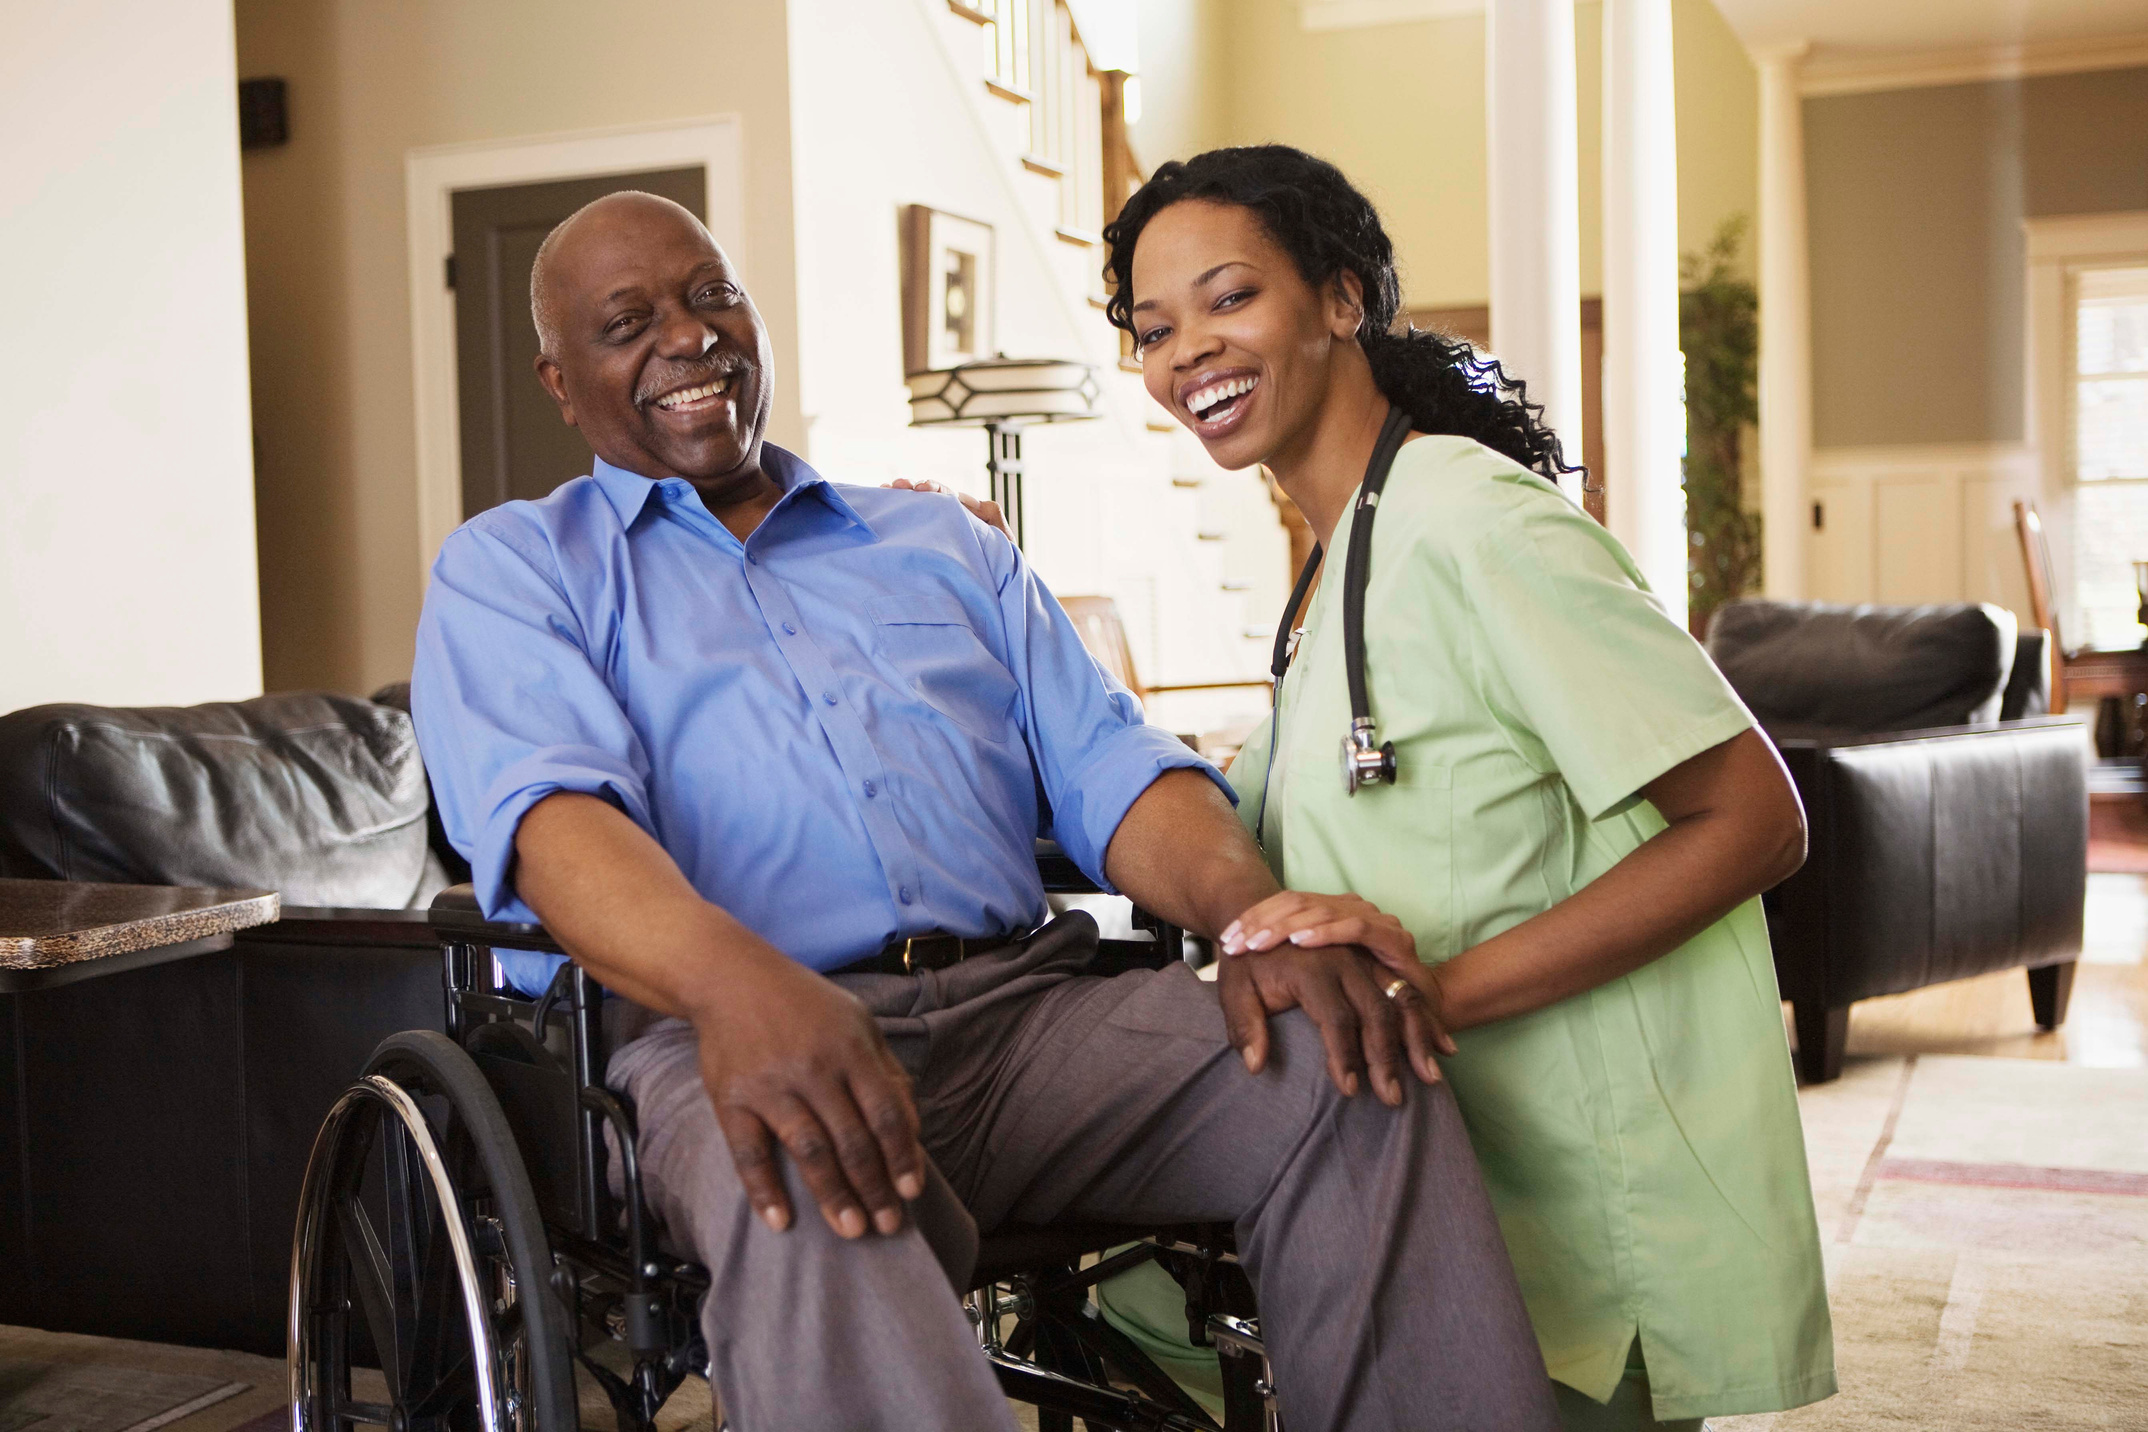 Nurse with man in wheelchair at home